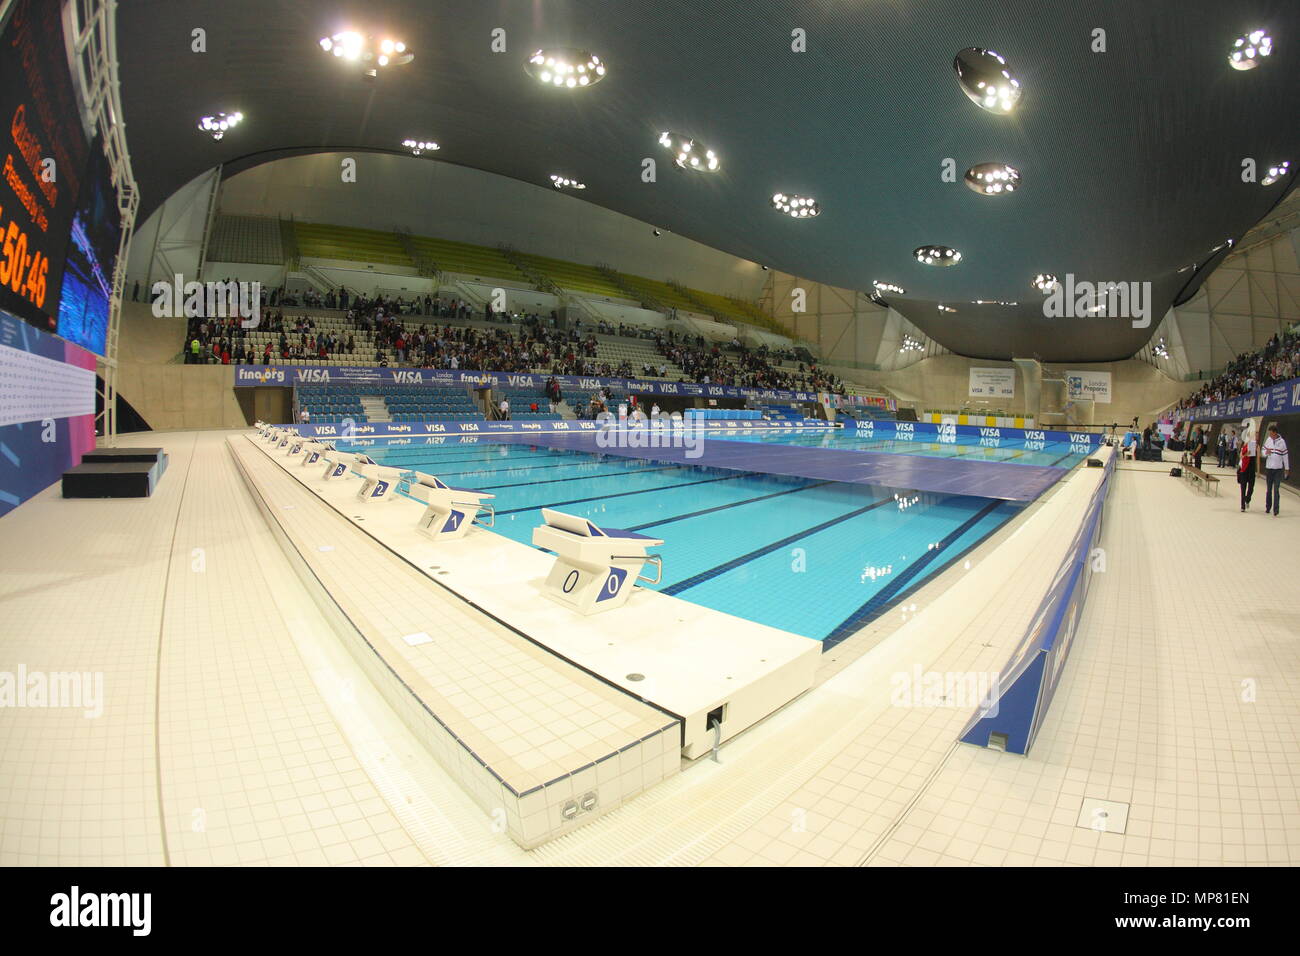 The Aquatic Centre during the Fina Synchronised Swimming events at the London Olympic Park 22 April 2012 --- Image by © Paul Cunningham Stock Photo